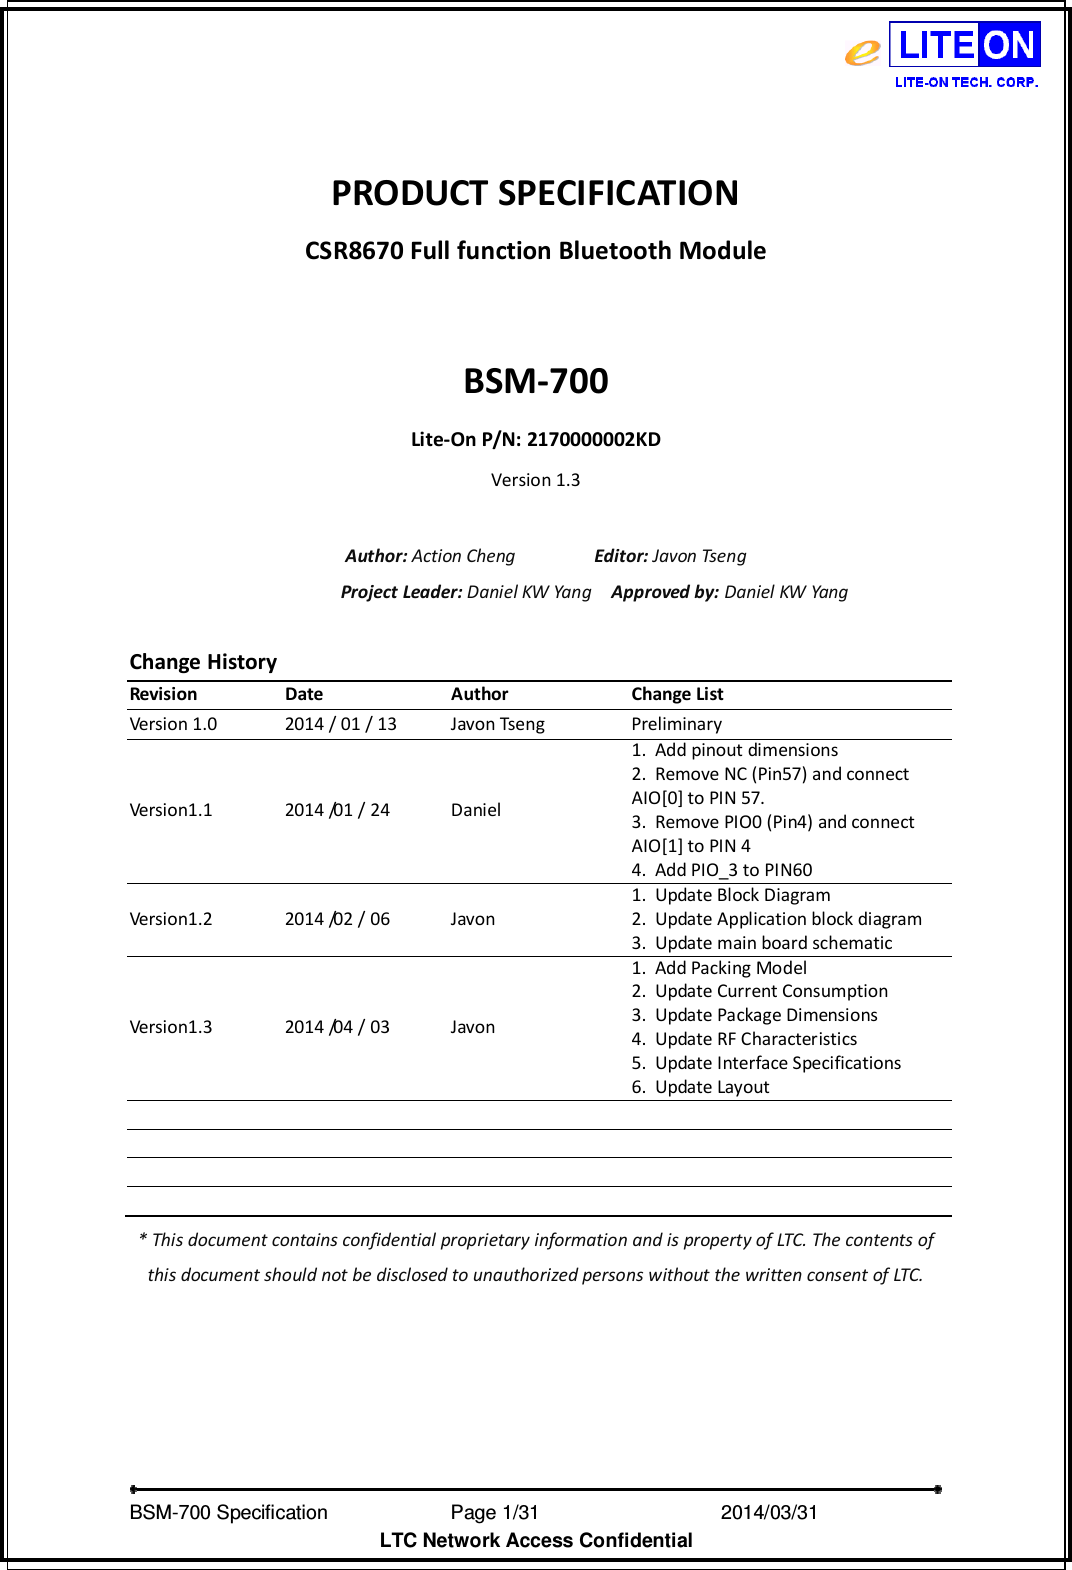   BSM-700 Specification                Page 1/31                            2014/03/31 LTC Network Access Confidential  PRODUCT SPECIFICATION CSR8670 Full function Bluetooth Module  BSM-700 Lite-On P/N: 2170000002KD Version 1.3  Author: Action Cheng                Editor: Javon Tseng Project Leader: Daniel KW Yang    Approved by: Daniel KW Yang  Change History Revision  Date  Author  Change List Version 1.0  2014 / 01 / 13  Javon Tseng  Preliminary Version1.1  2014 /01 / 24  Daniel 1. Add pinout dimensions 2. Remove NC (Pin57) and connect   AIO[0] to PIN 57. 3. Remove PIO0 (Pin4) and connect   AIO[1] to PIN 4 4. Add PIO_3 to PIN60 Version1.2  2014 /02 / 06  Javon 1. Update Block Diagram 2. Update Application block diagram 3. Update main board schematic Version1.3  2014 /04 / 03  Javon 1. Add Packing Model 2. Update Current Consumption 3. Update Package Dimensions 4. Update RF Characteristics 5. Update Interface Specifications 6. Update Layout                             * This document contains confidential proprietary information and is property of LTC. The contents of this document should not be disclosed to unauthorized persons without the written consent of LTC.   